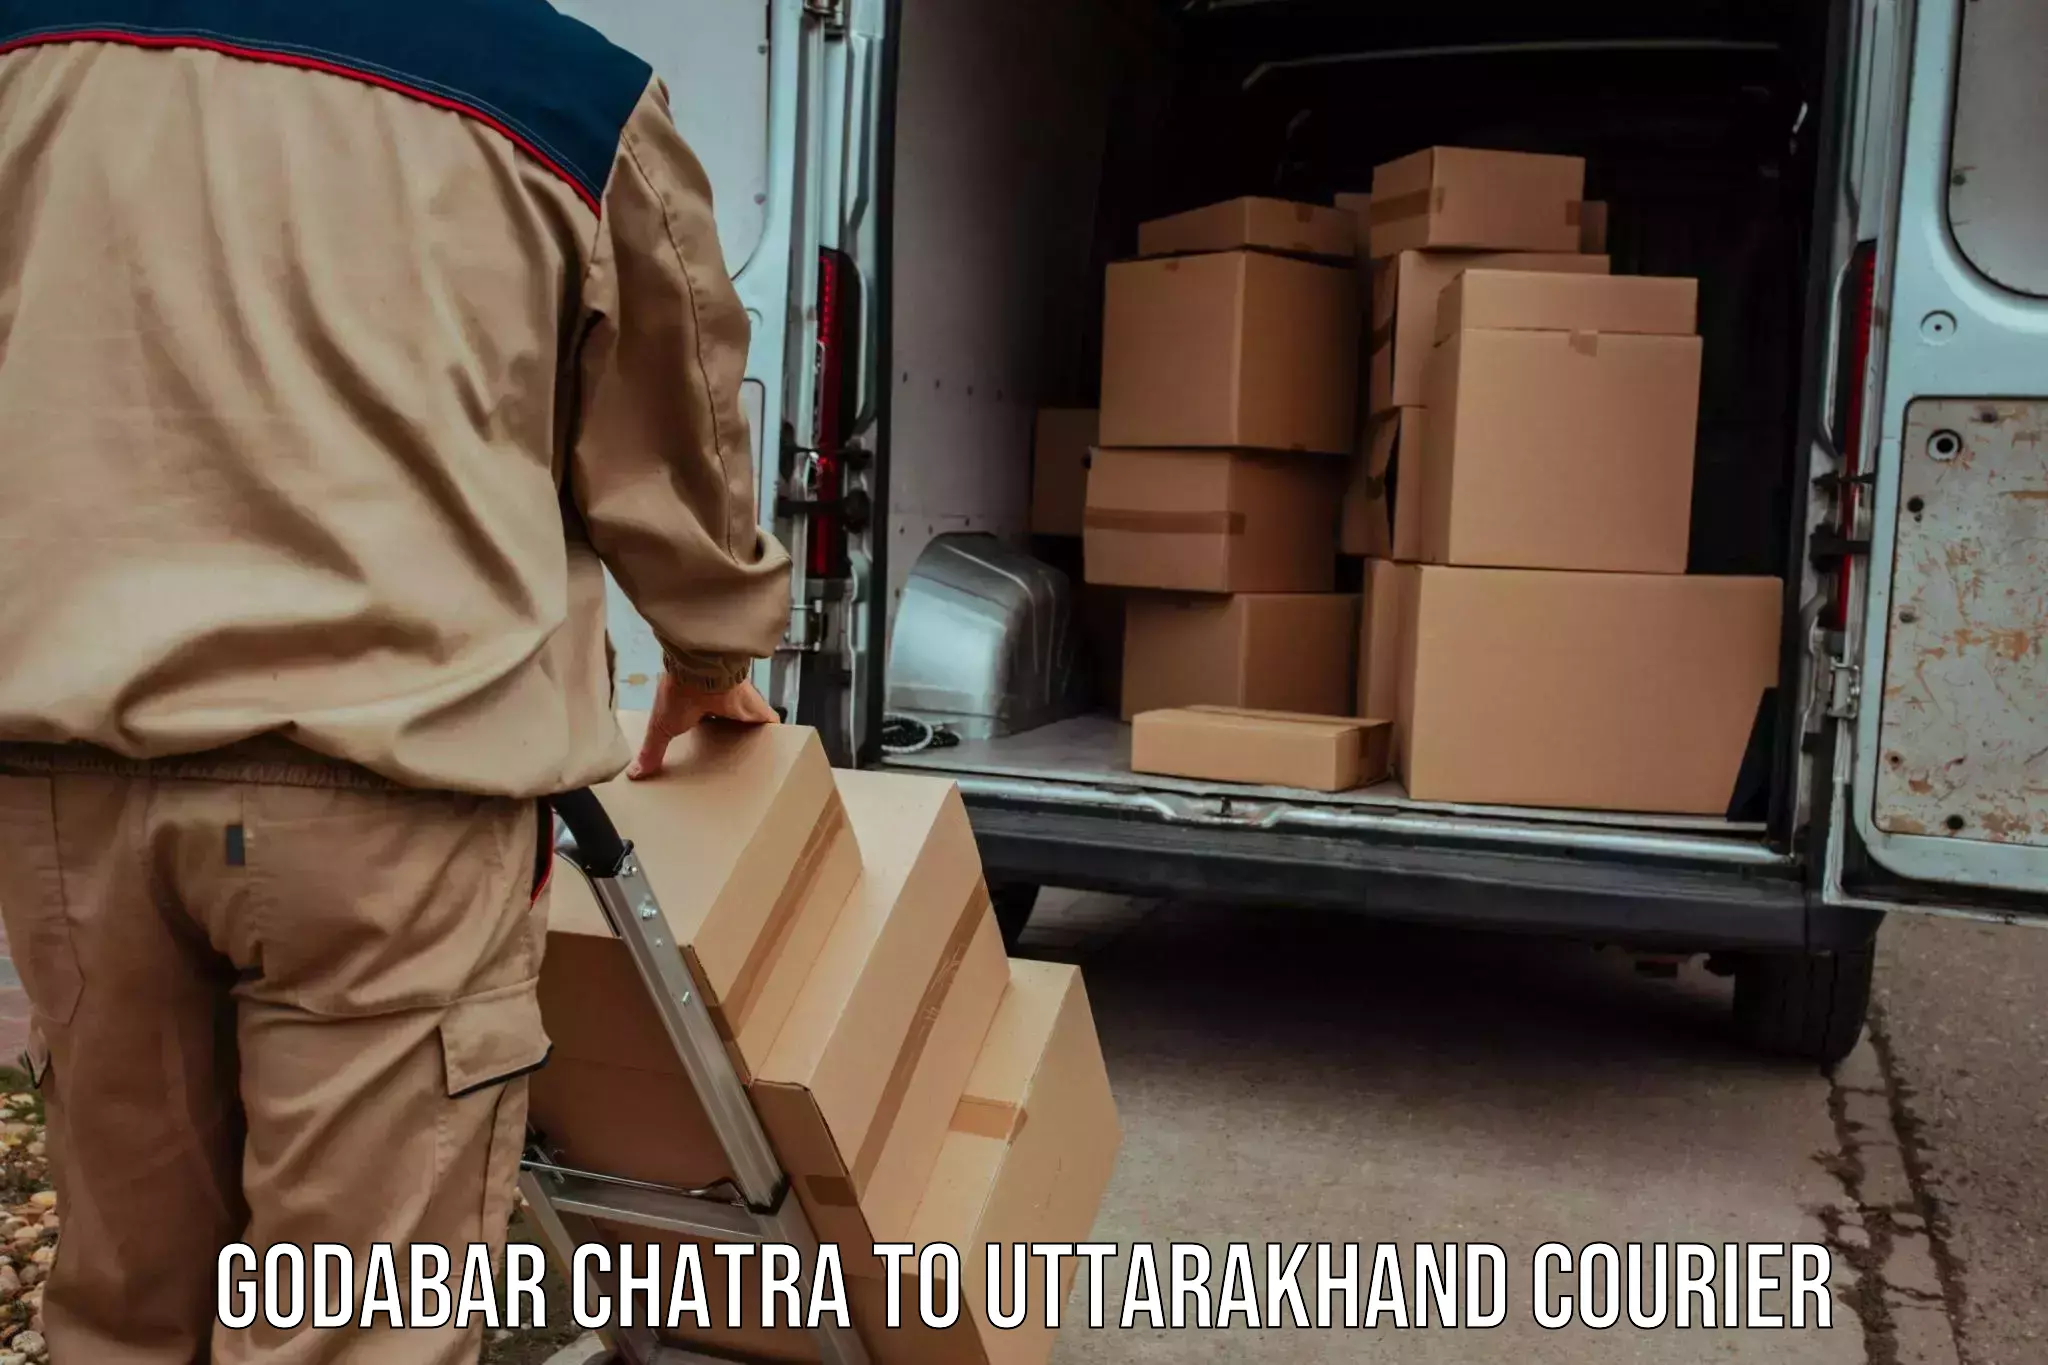 Easy access courier services Godabar Chatra to Lohaghat